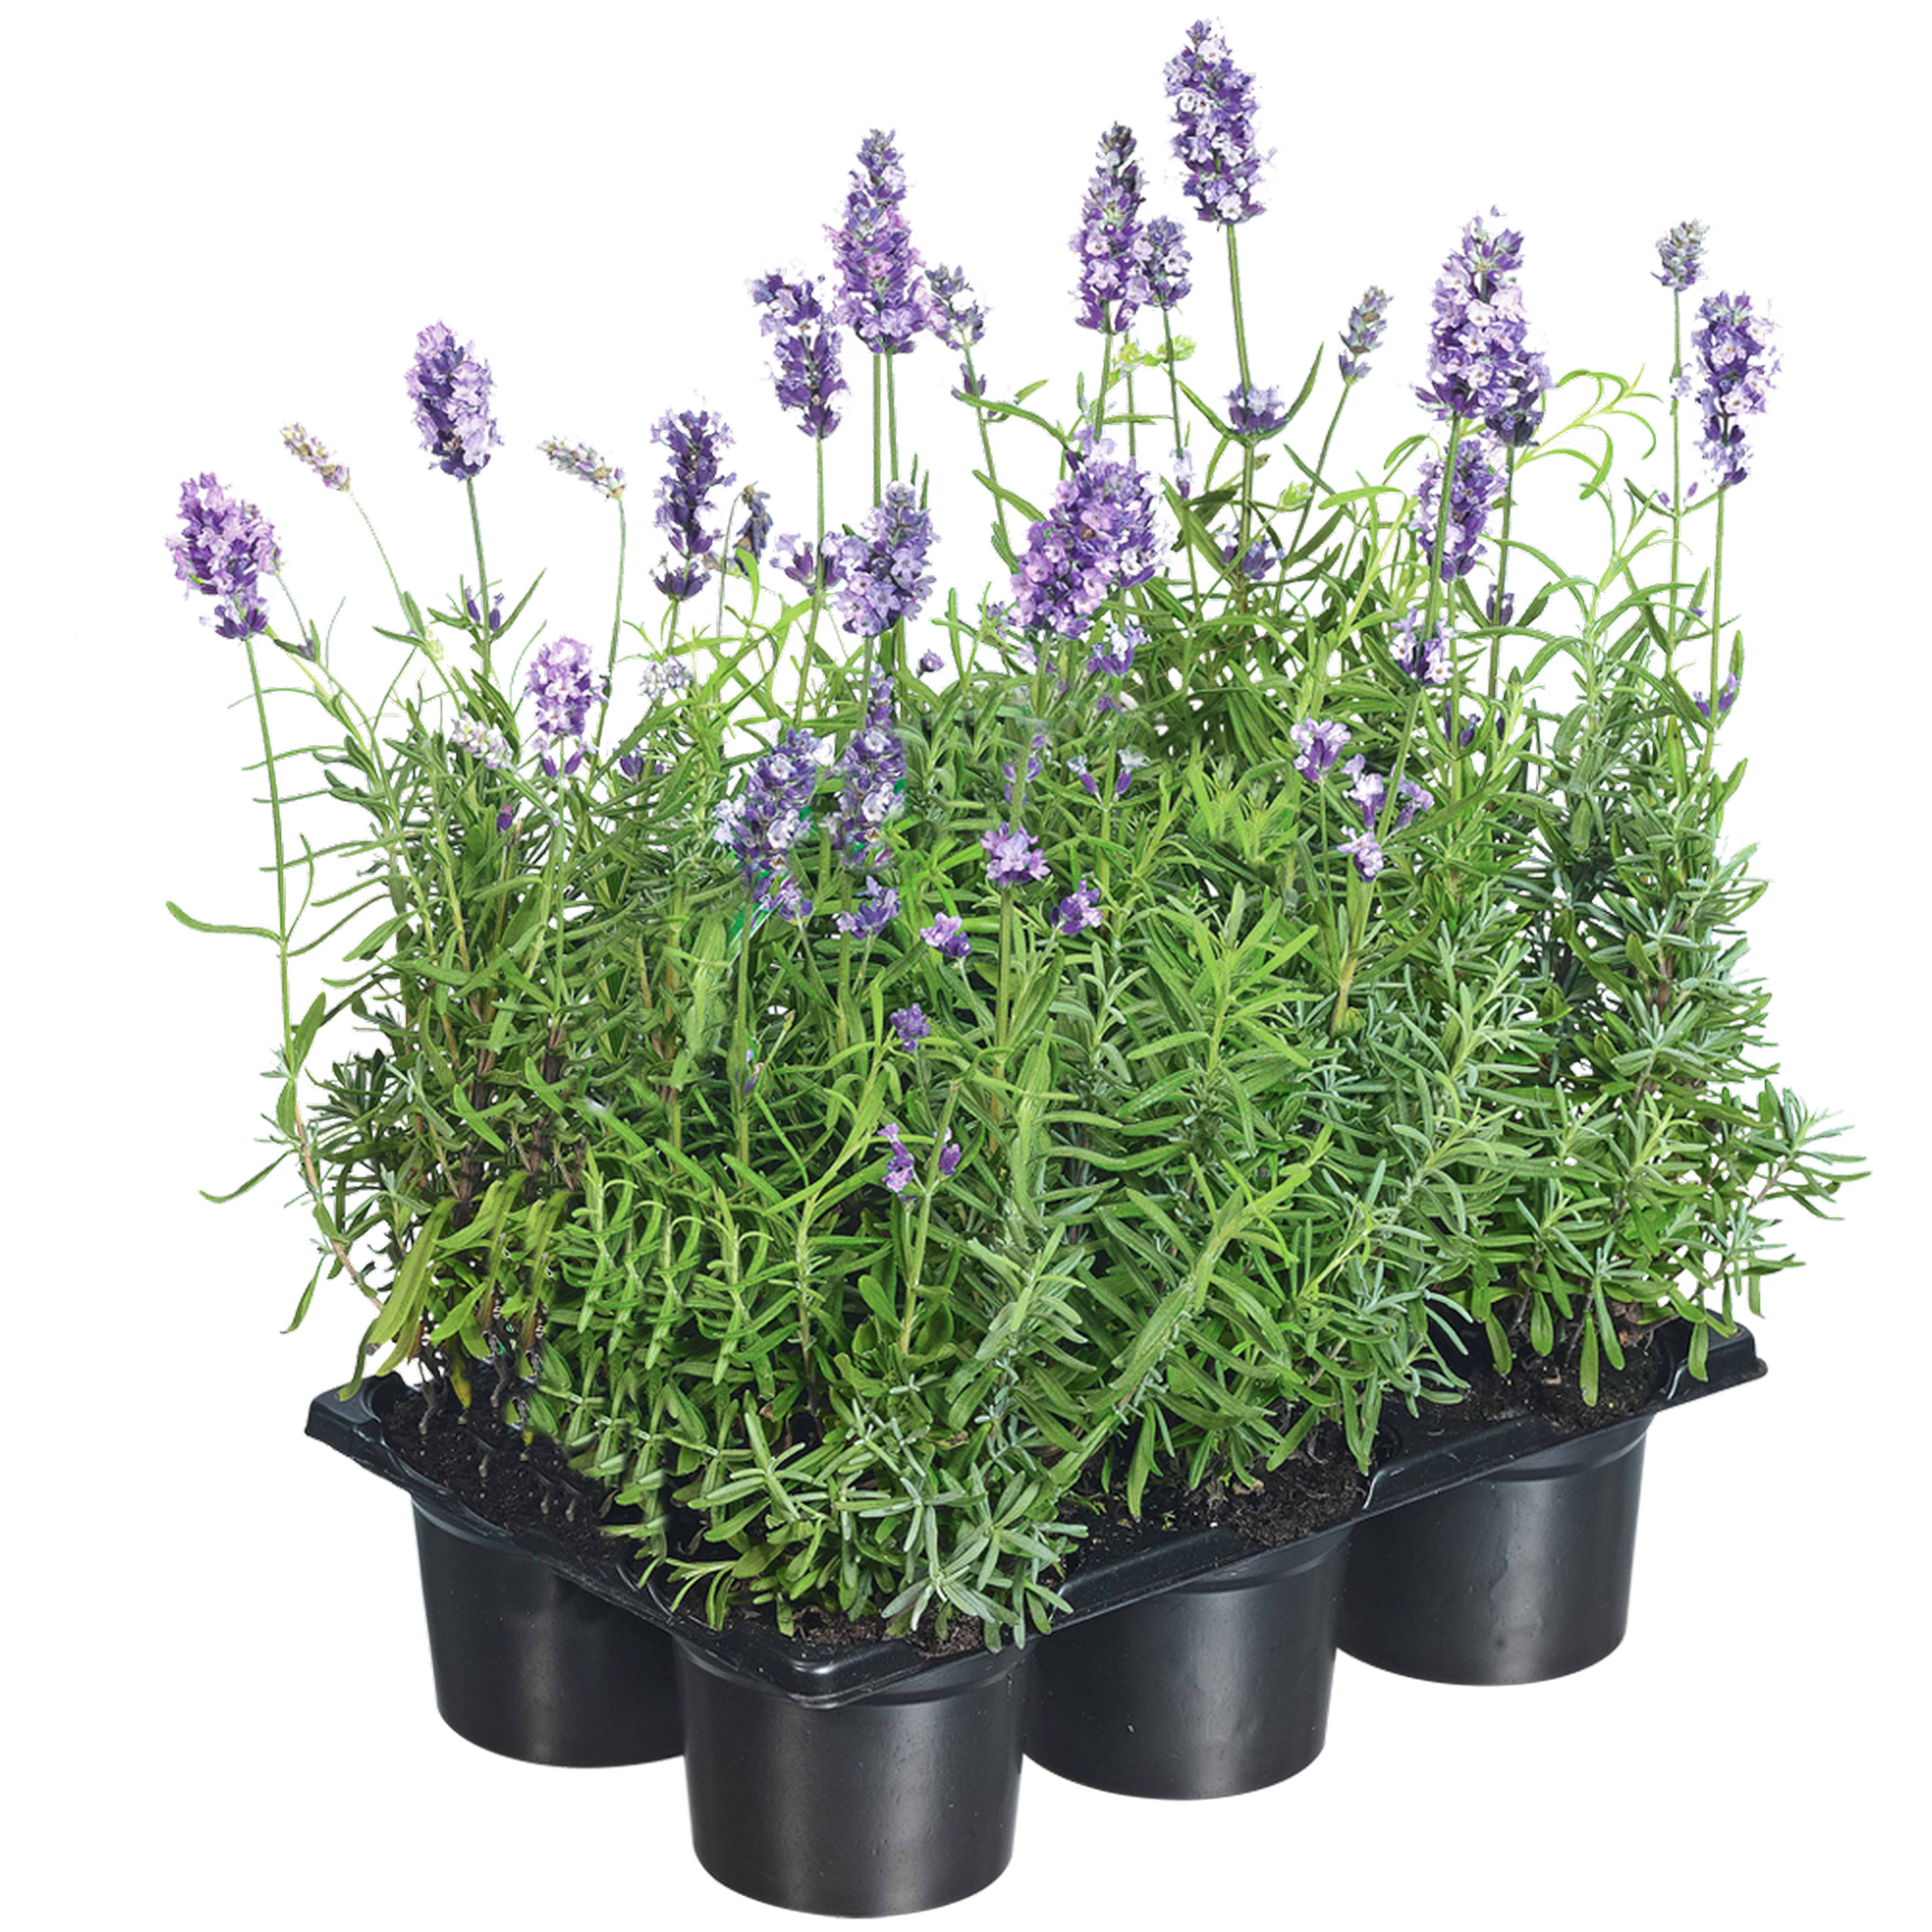 Lavendel blau 6er-Tray + product picture